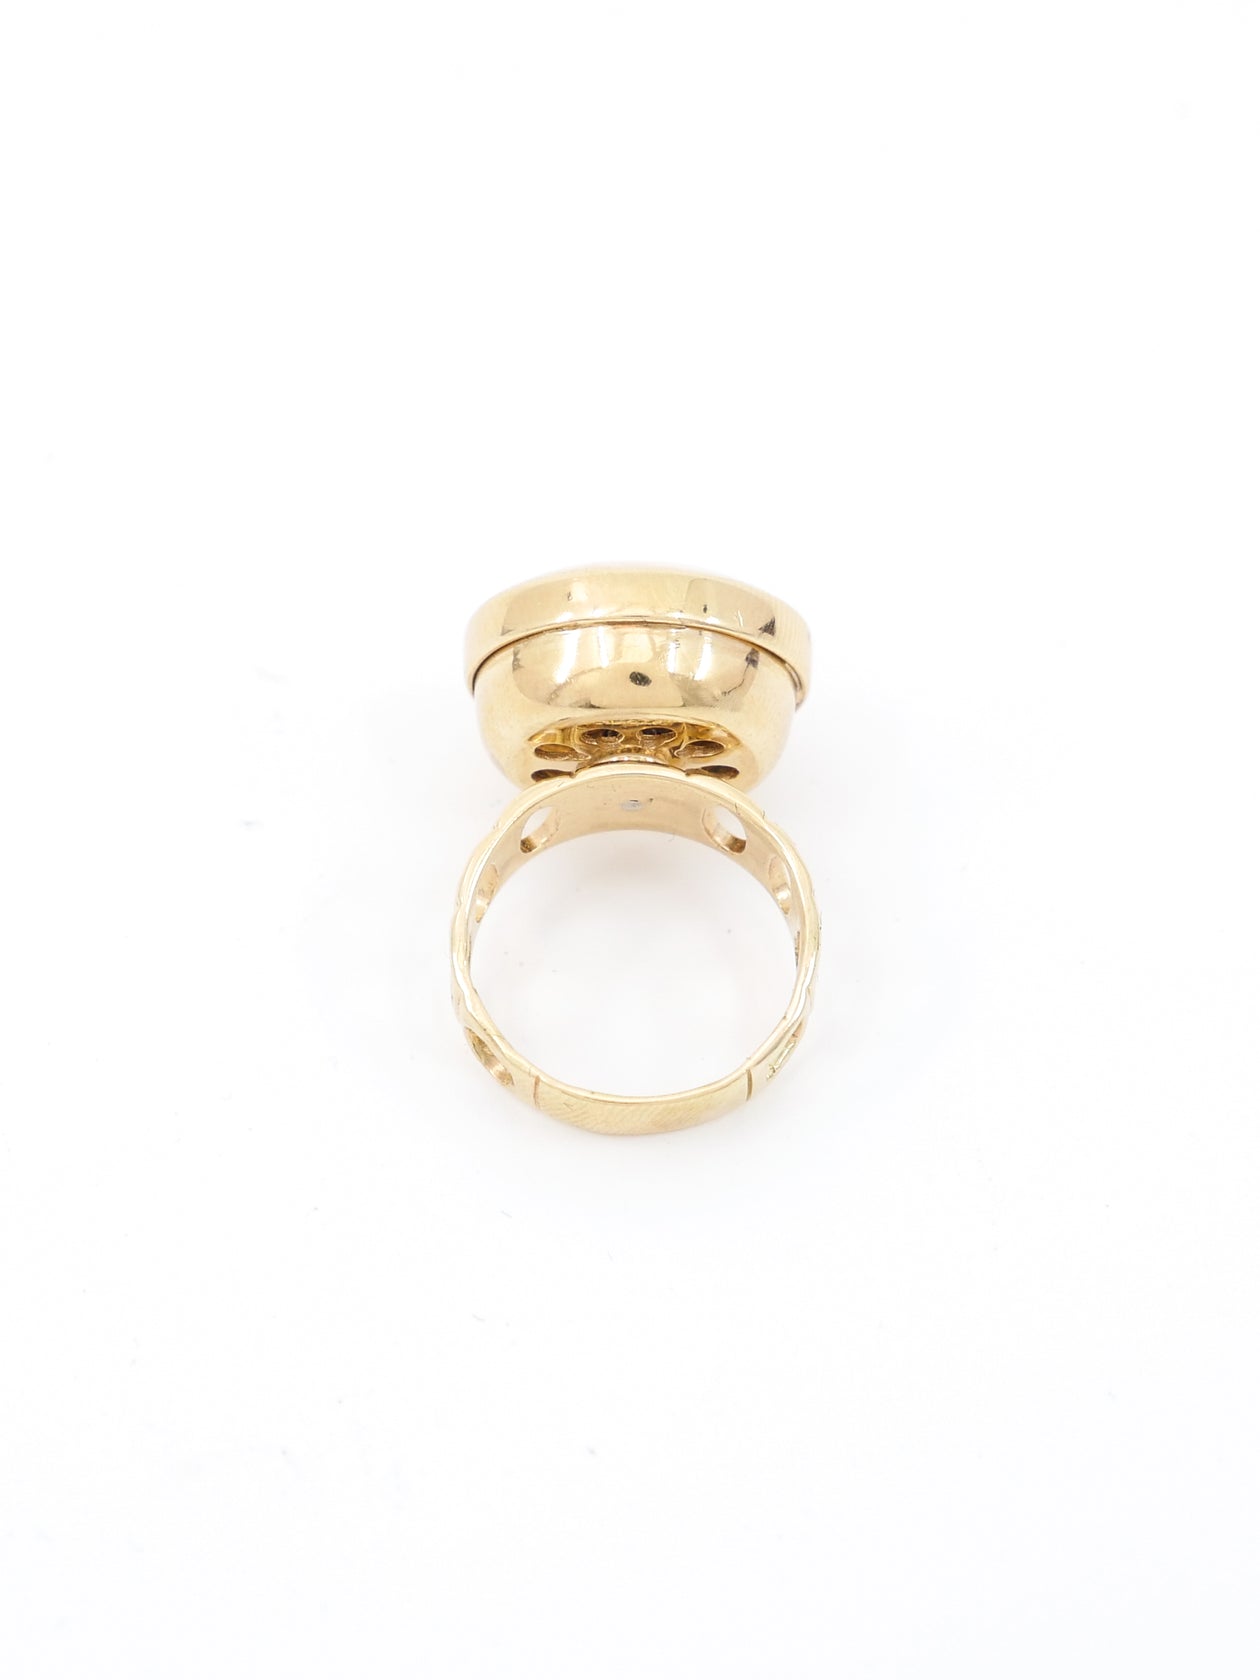 Rolling Dices Lucky Dice Shaped Adjustable Ring in Gold